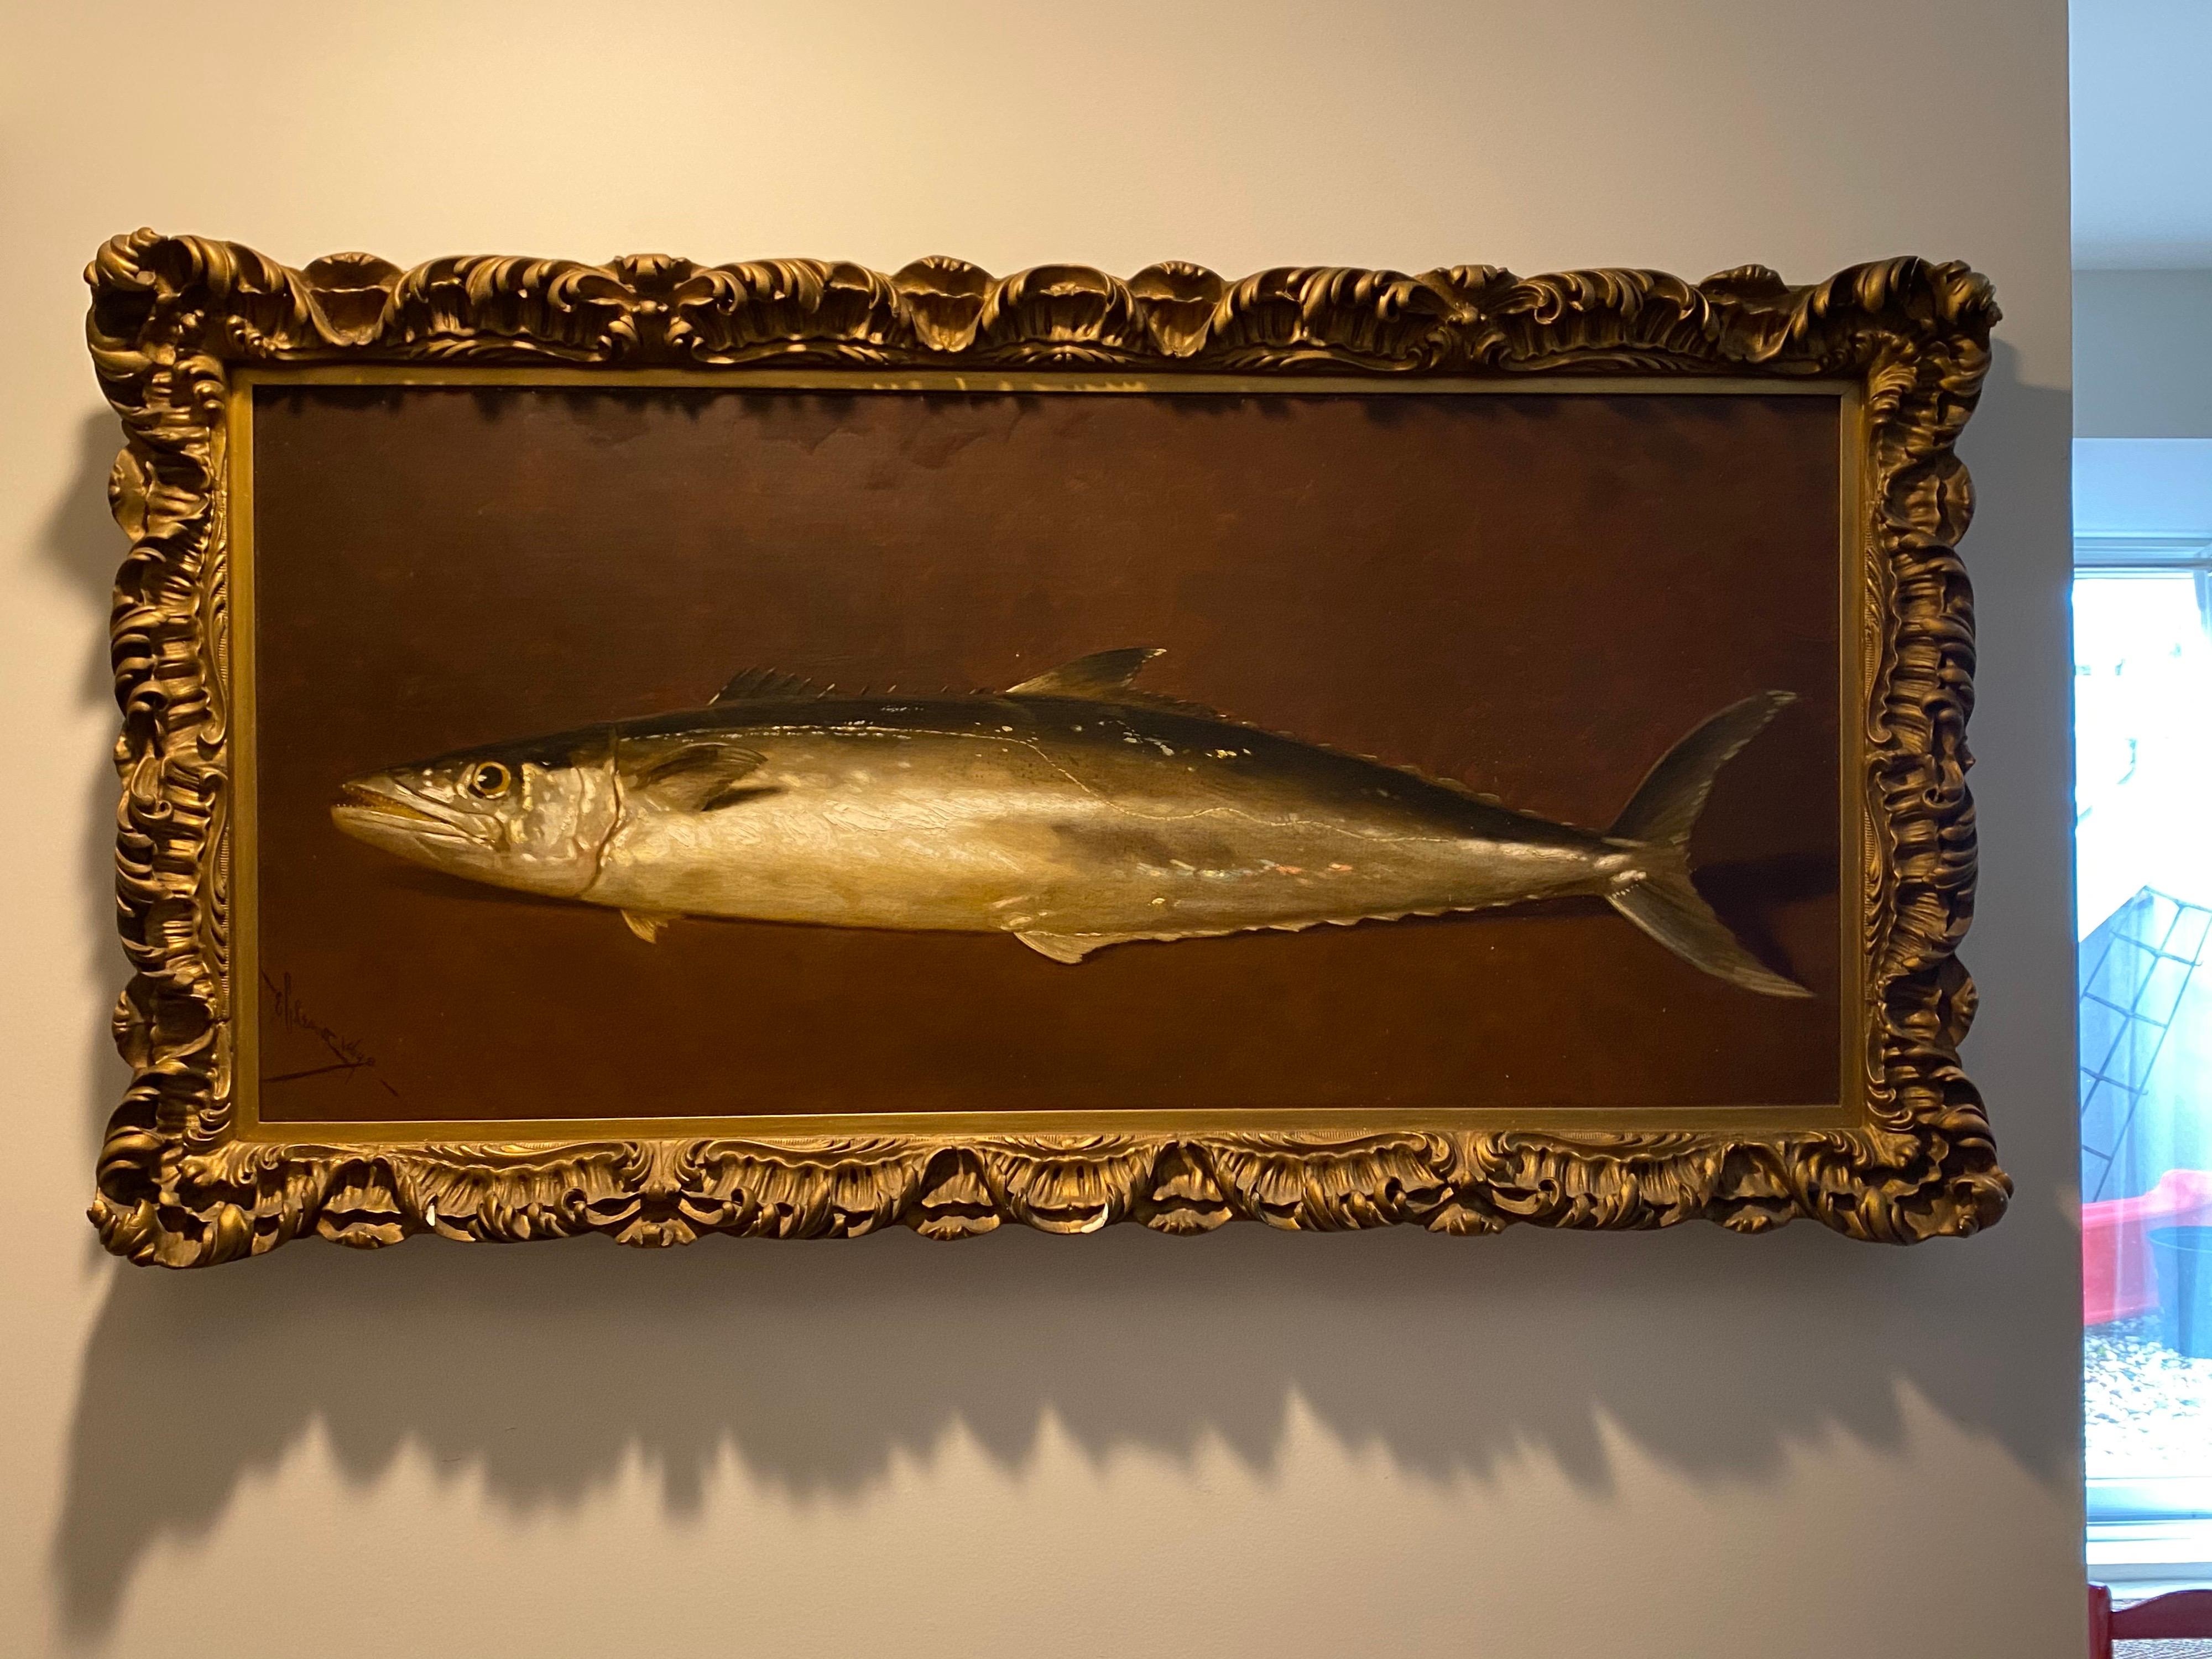 Edward Chalmers Leavitt, American (1842-1904),
King Mackerel, fish still life, 
oil on canvas, 
signed and dated: 'E C Leavitt 1898' lower left.

Provenance: Private Collection in the Hamptons

Framed: 51